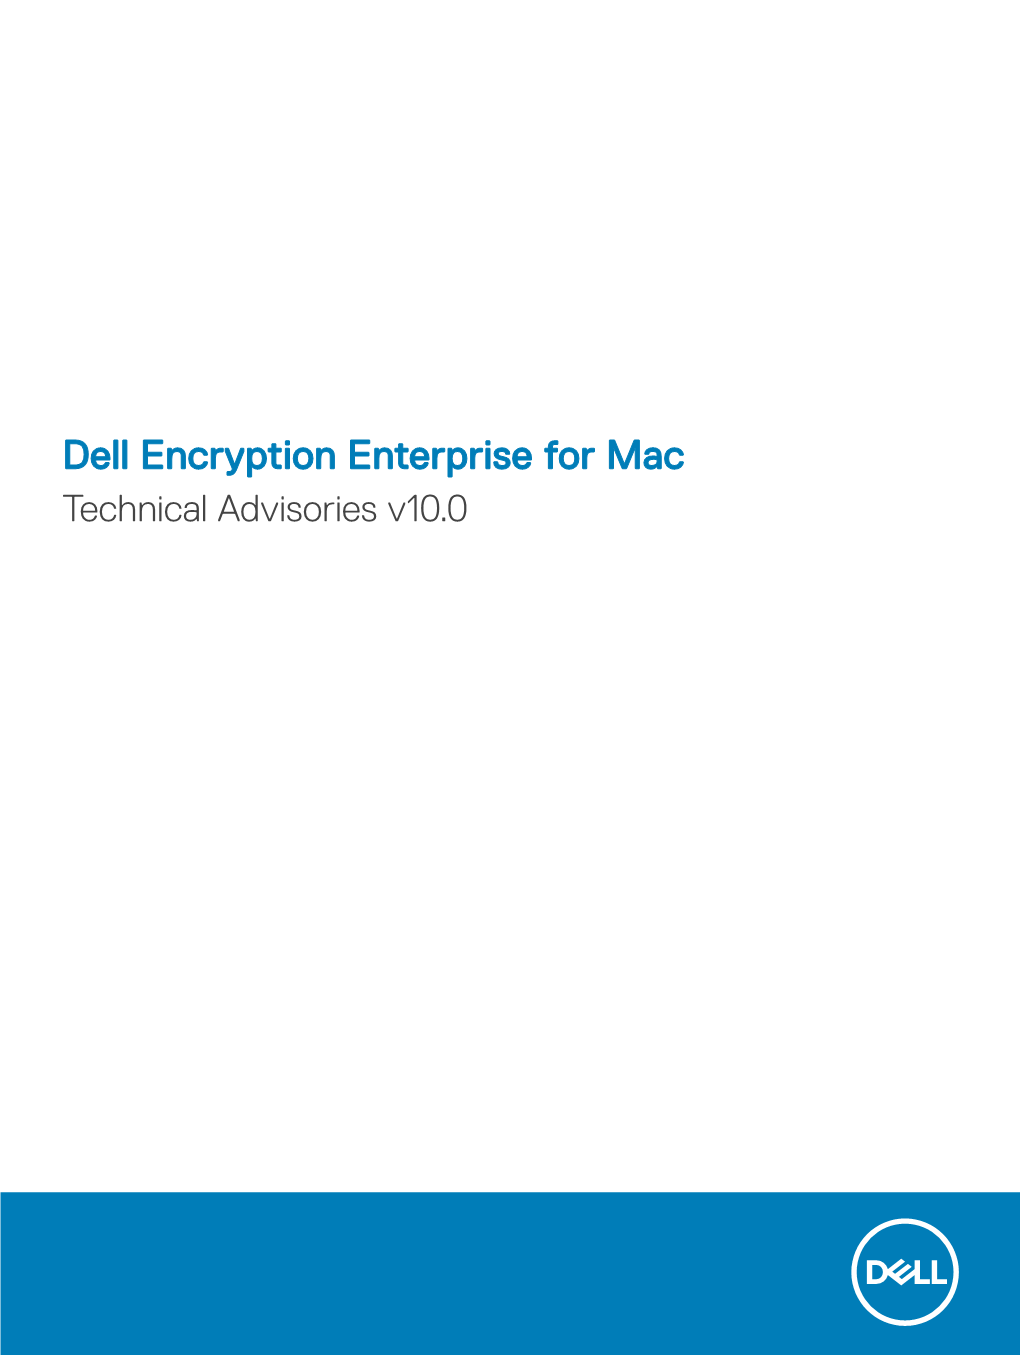 Encryption Enterprise for Mac Technical Advisories V10.0 Notes, Cautions, and Warnings